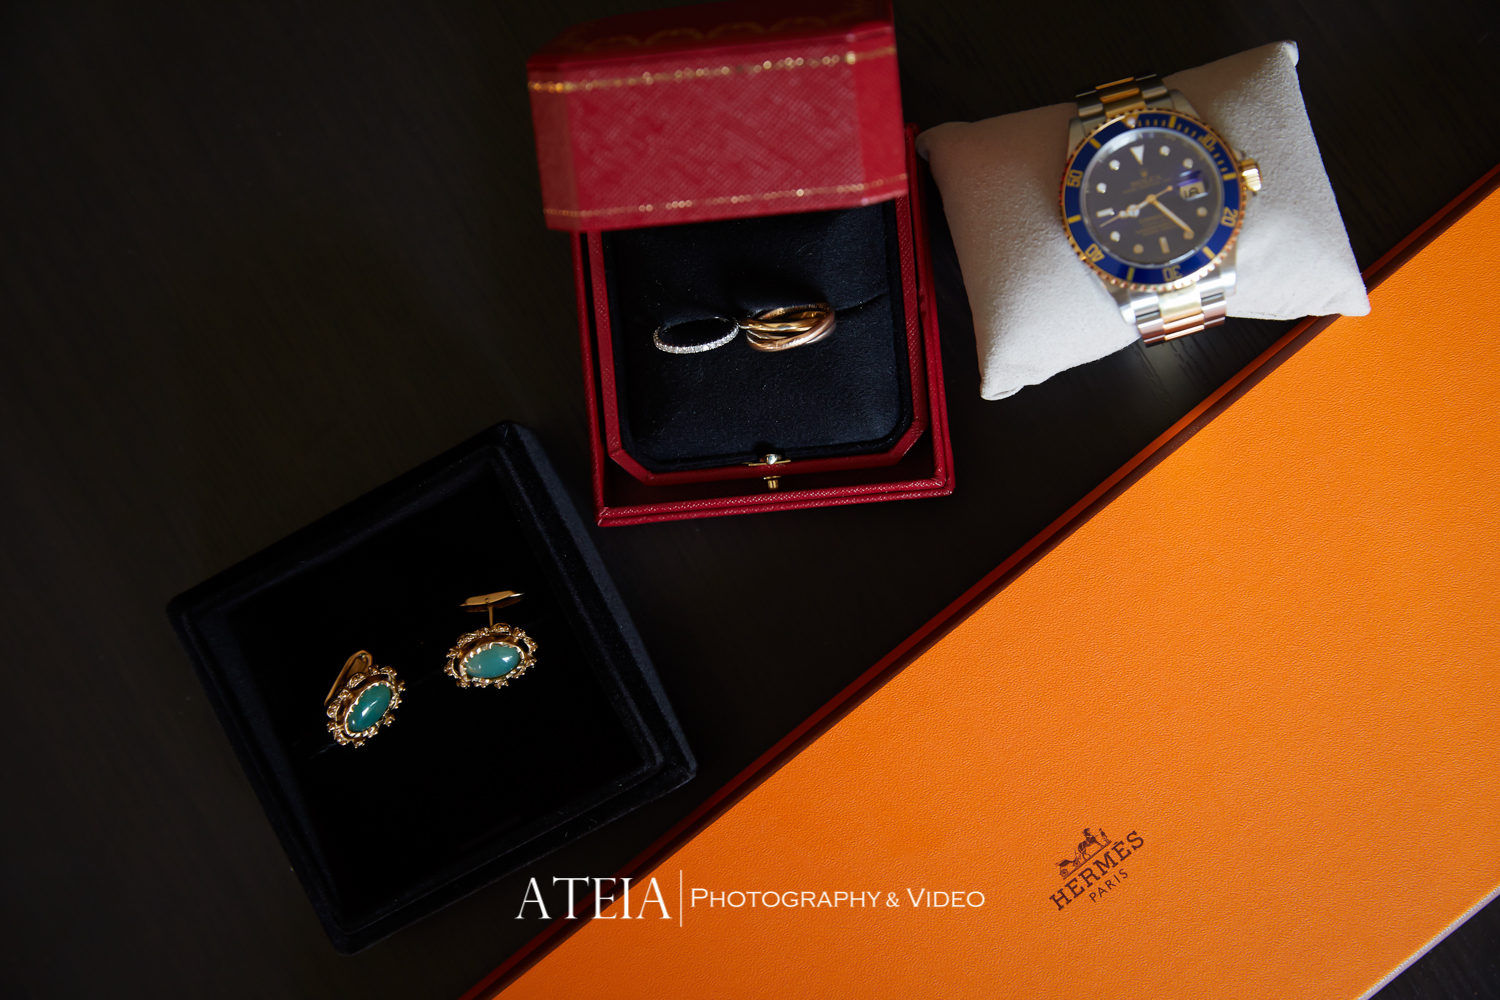 , Park Hyatt Wedding Photography Melbourne by ATEIA Photography &#038; Video